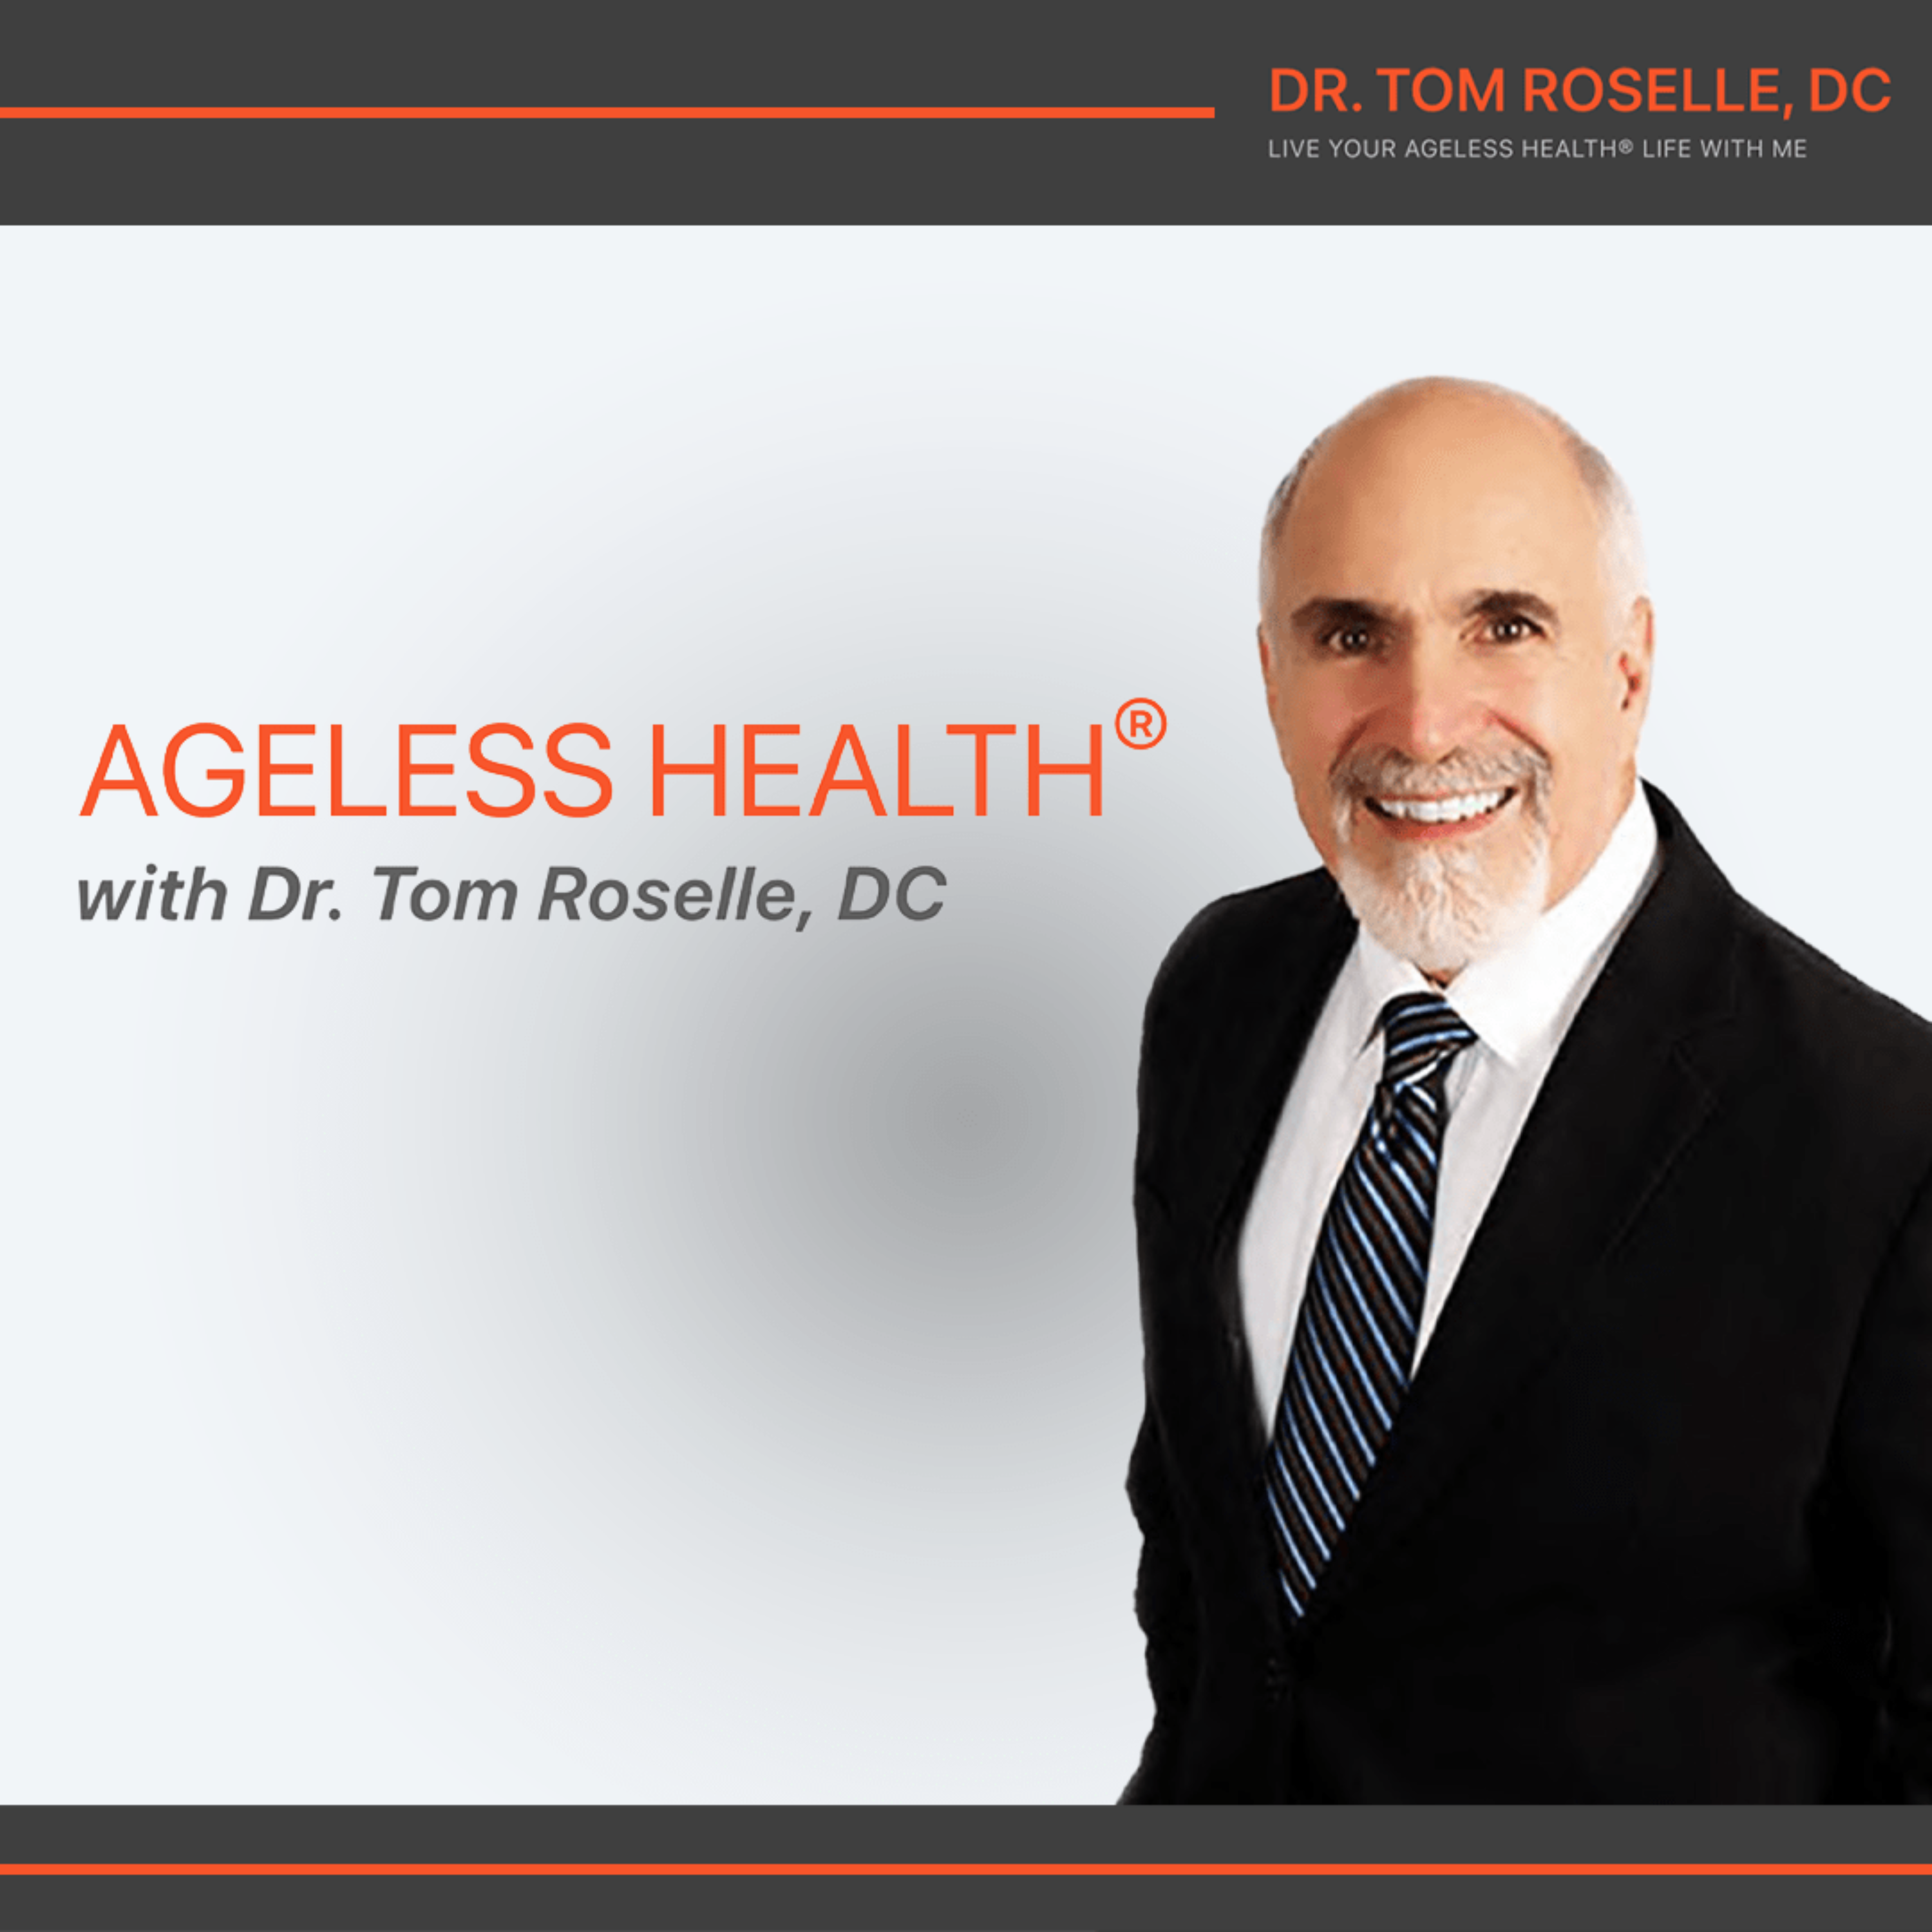 Ageless Health with Dr. Tom Roselle, DC